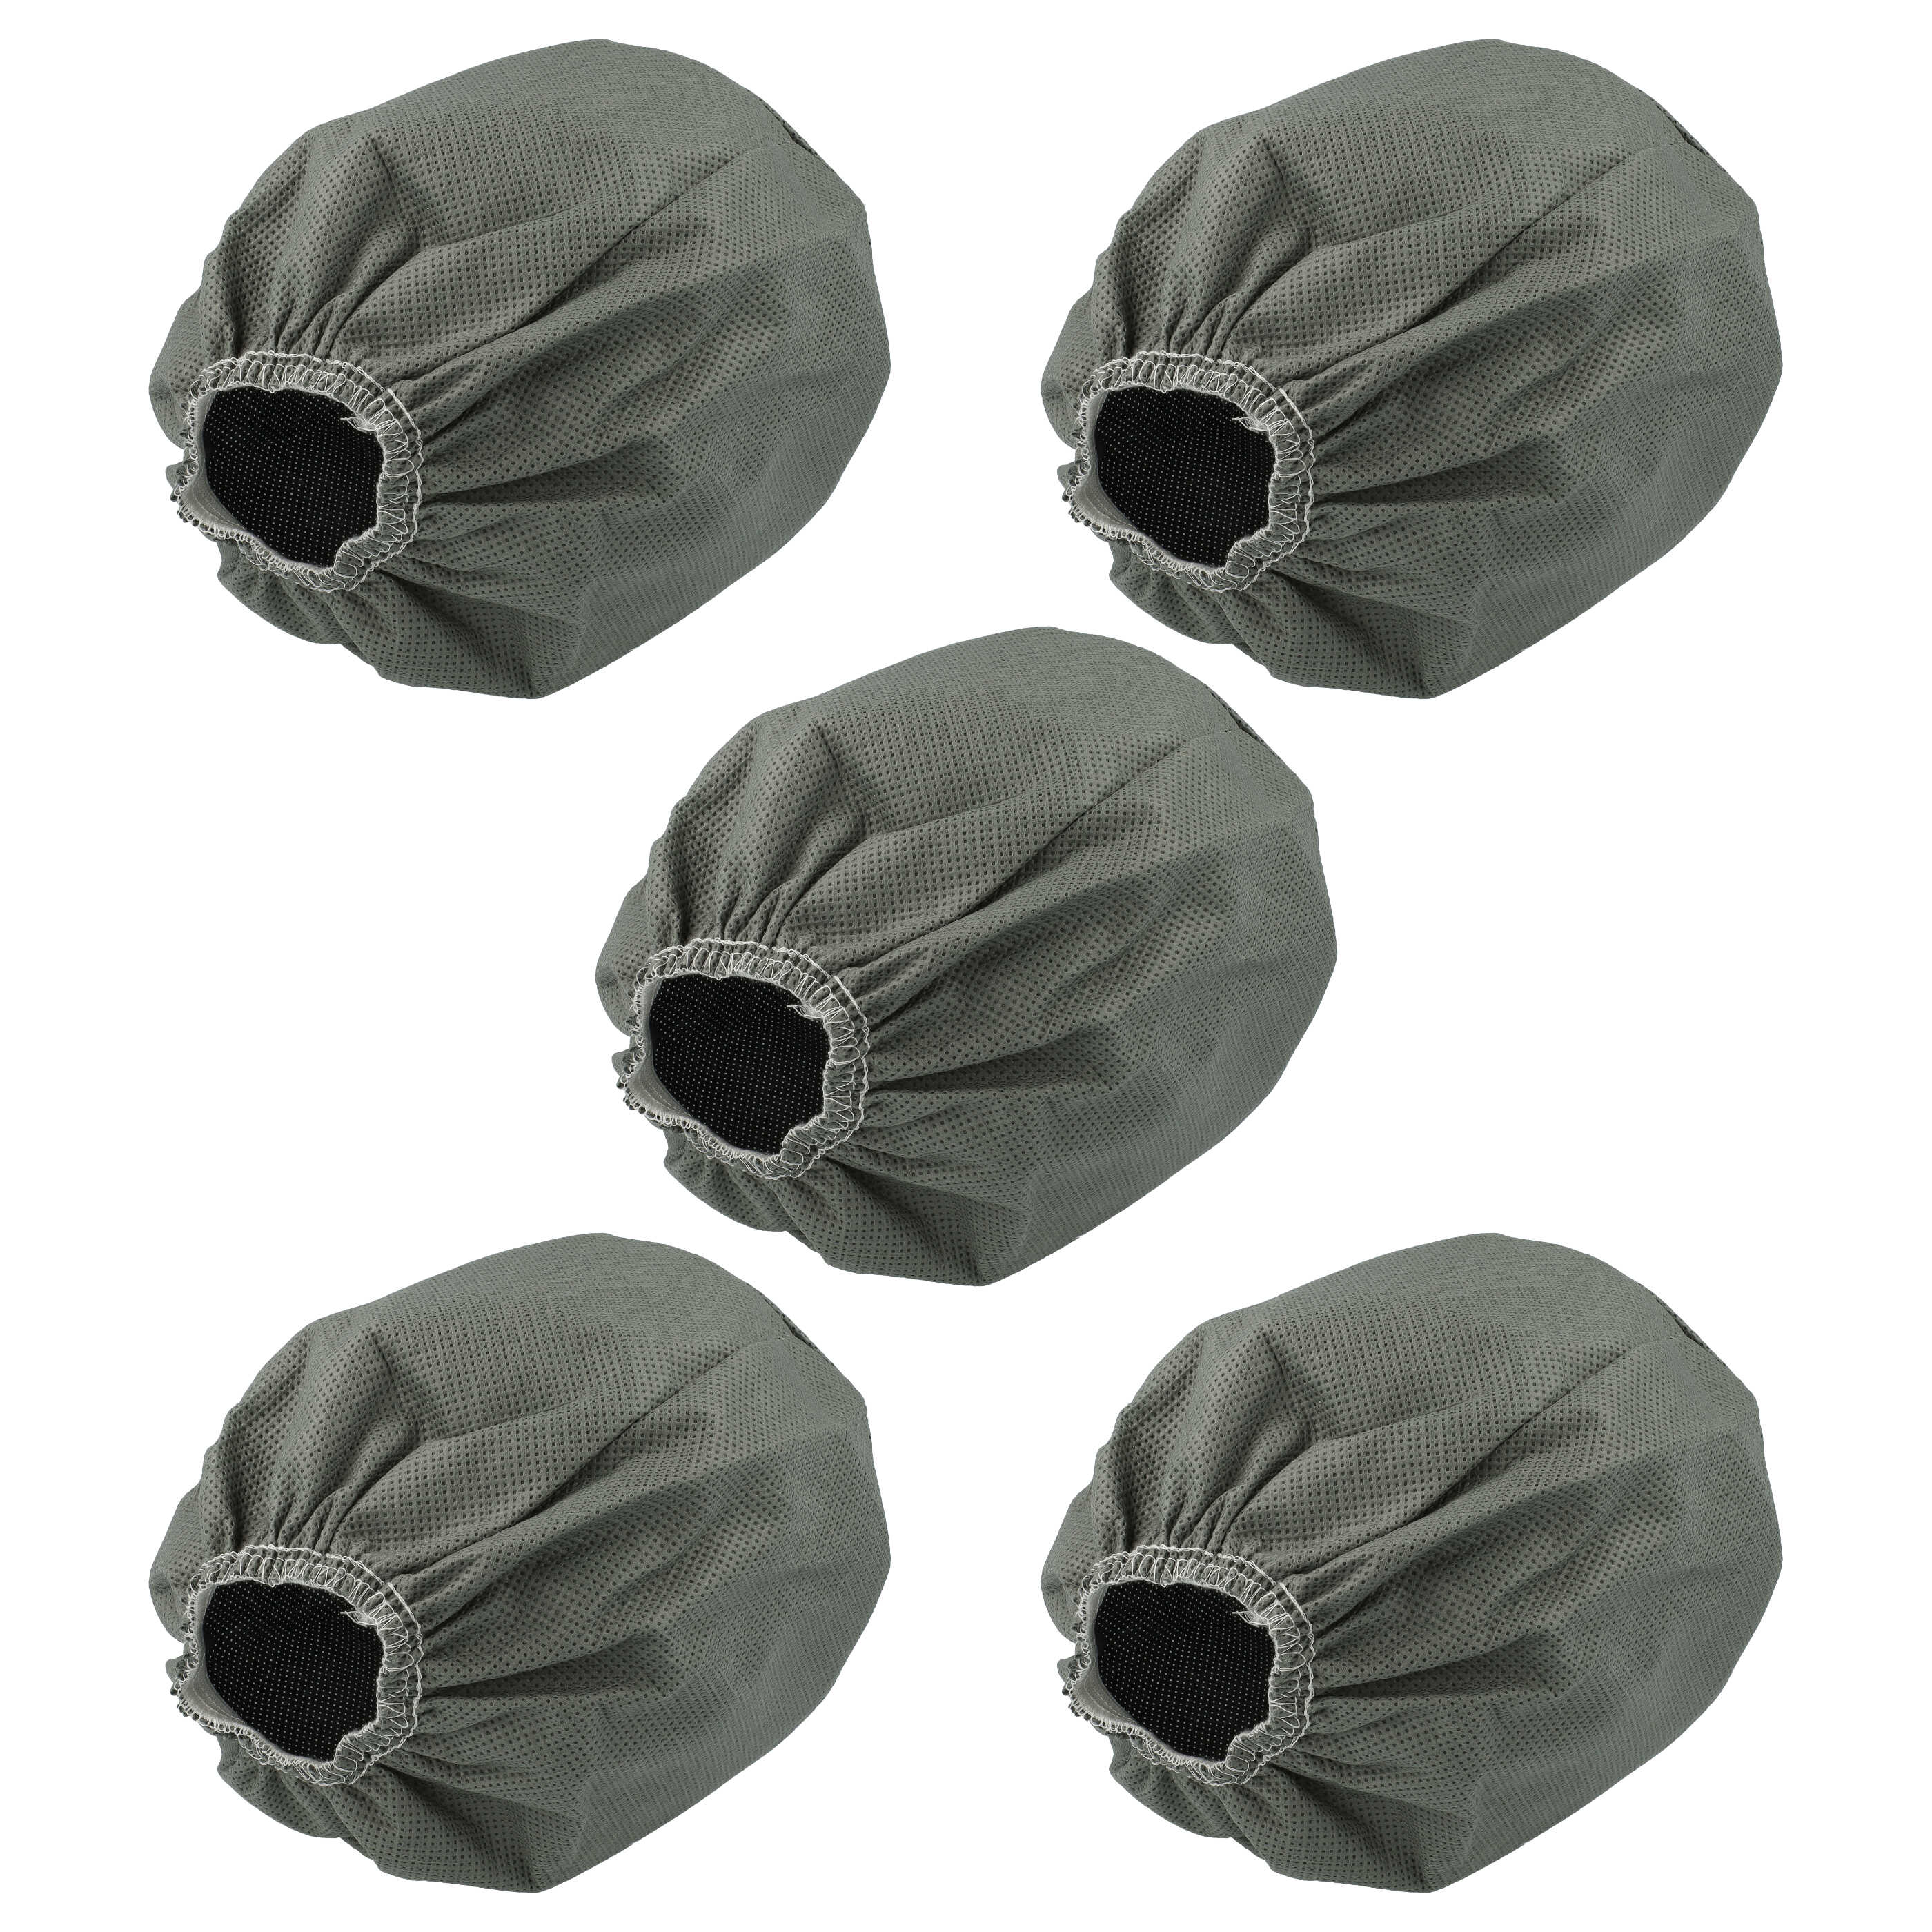 5x textile filter replaces Bosch 2609256F41, 2 609 256 F41 for BoschVacuum Cleaner